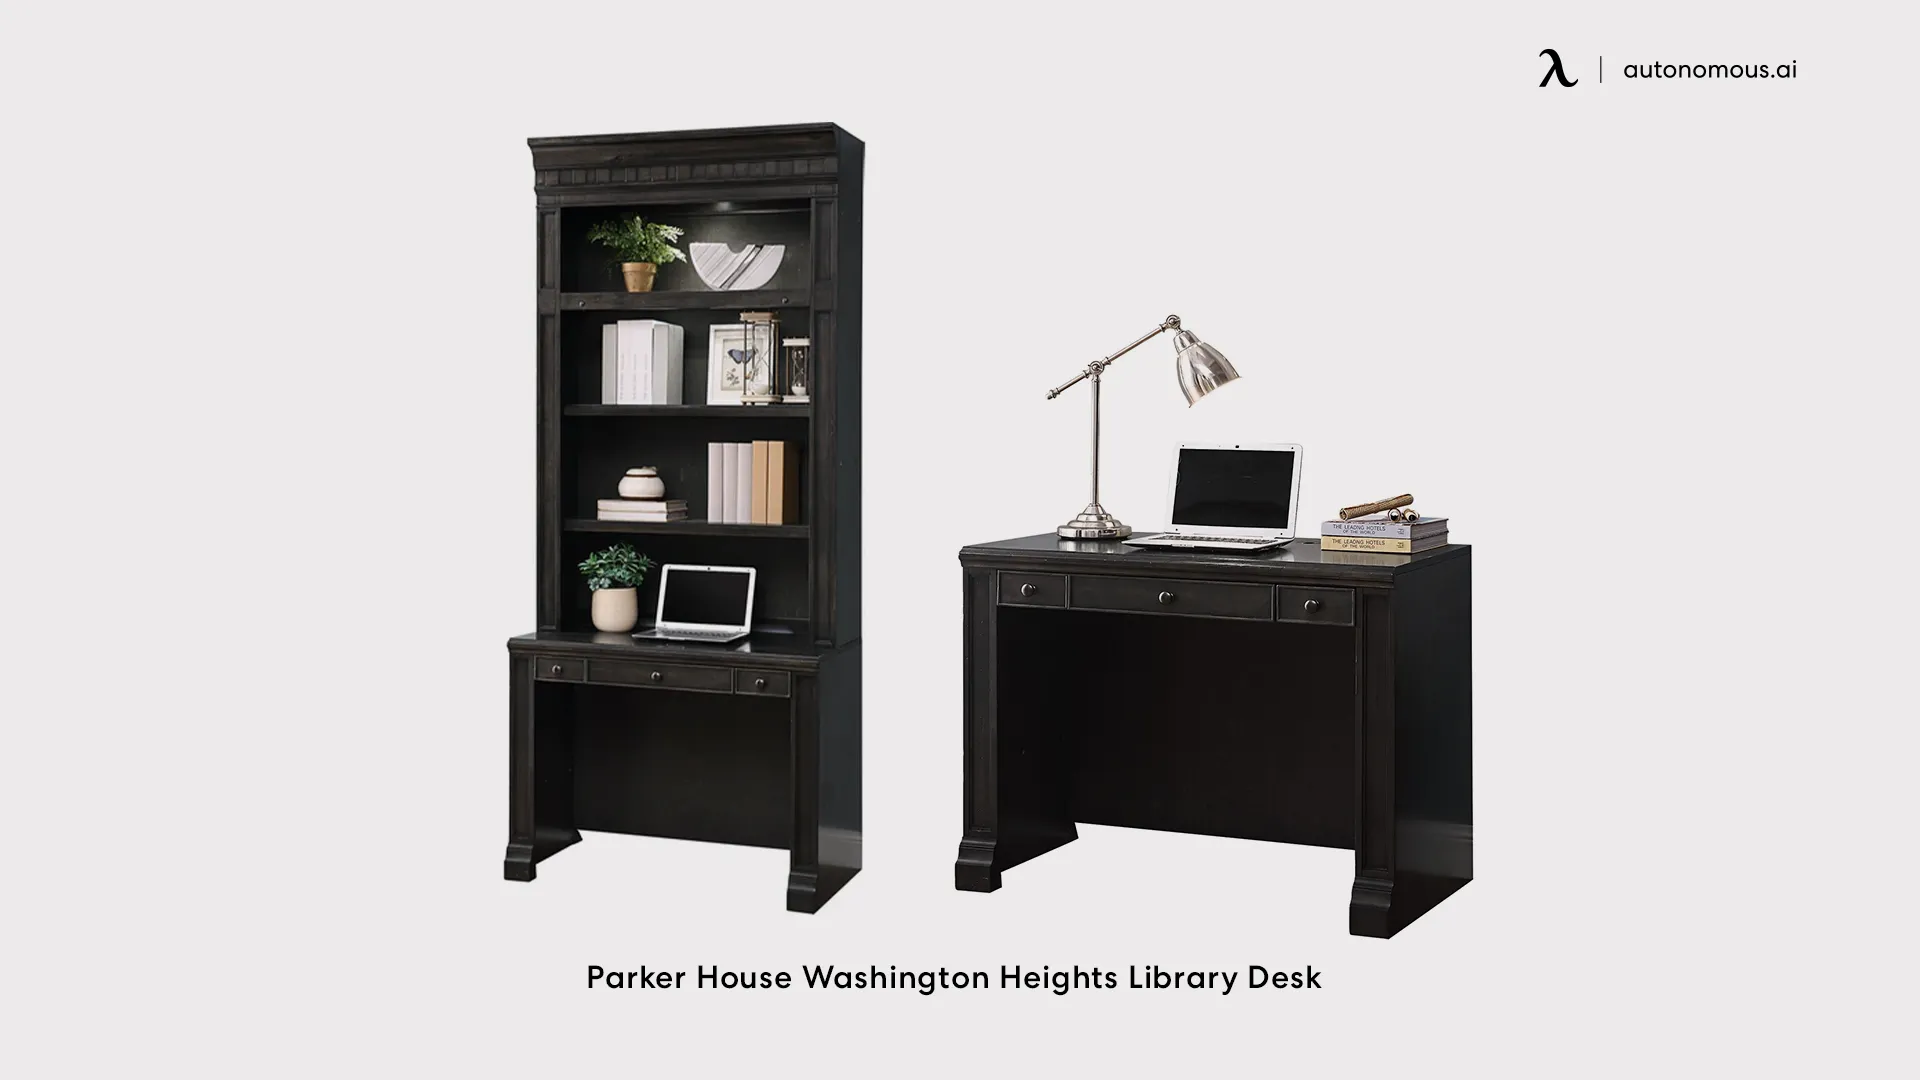 Parker House Washington Heights Library Desk